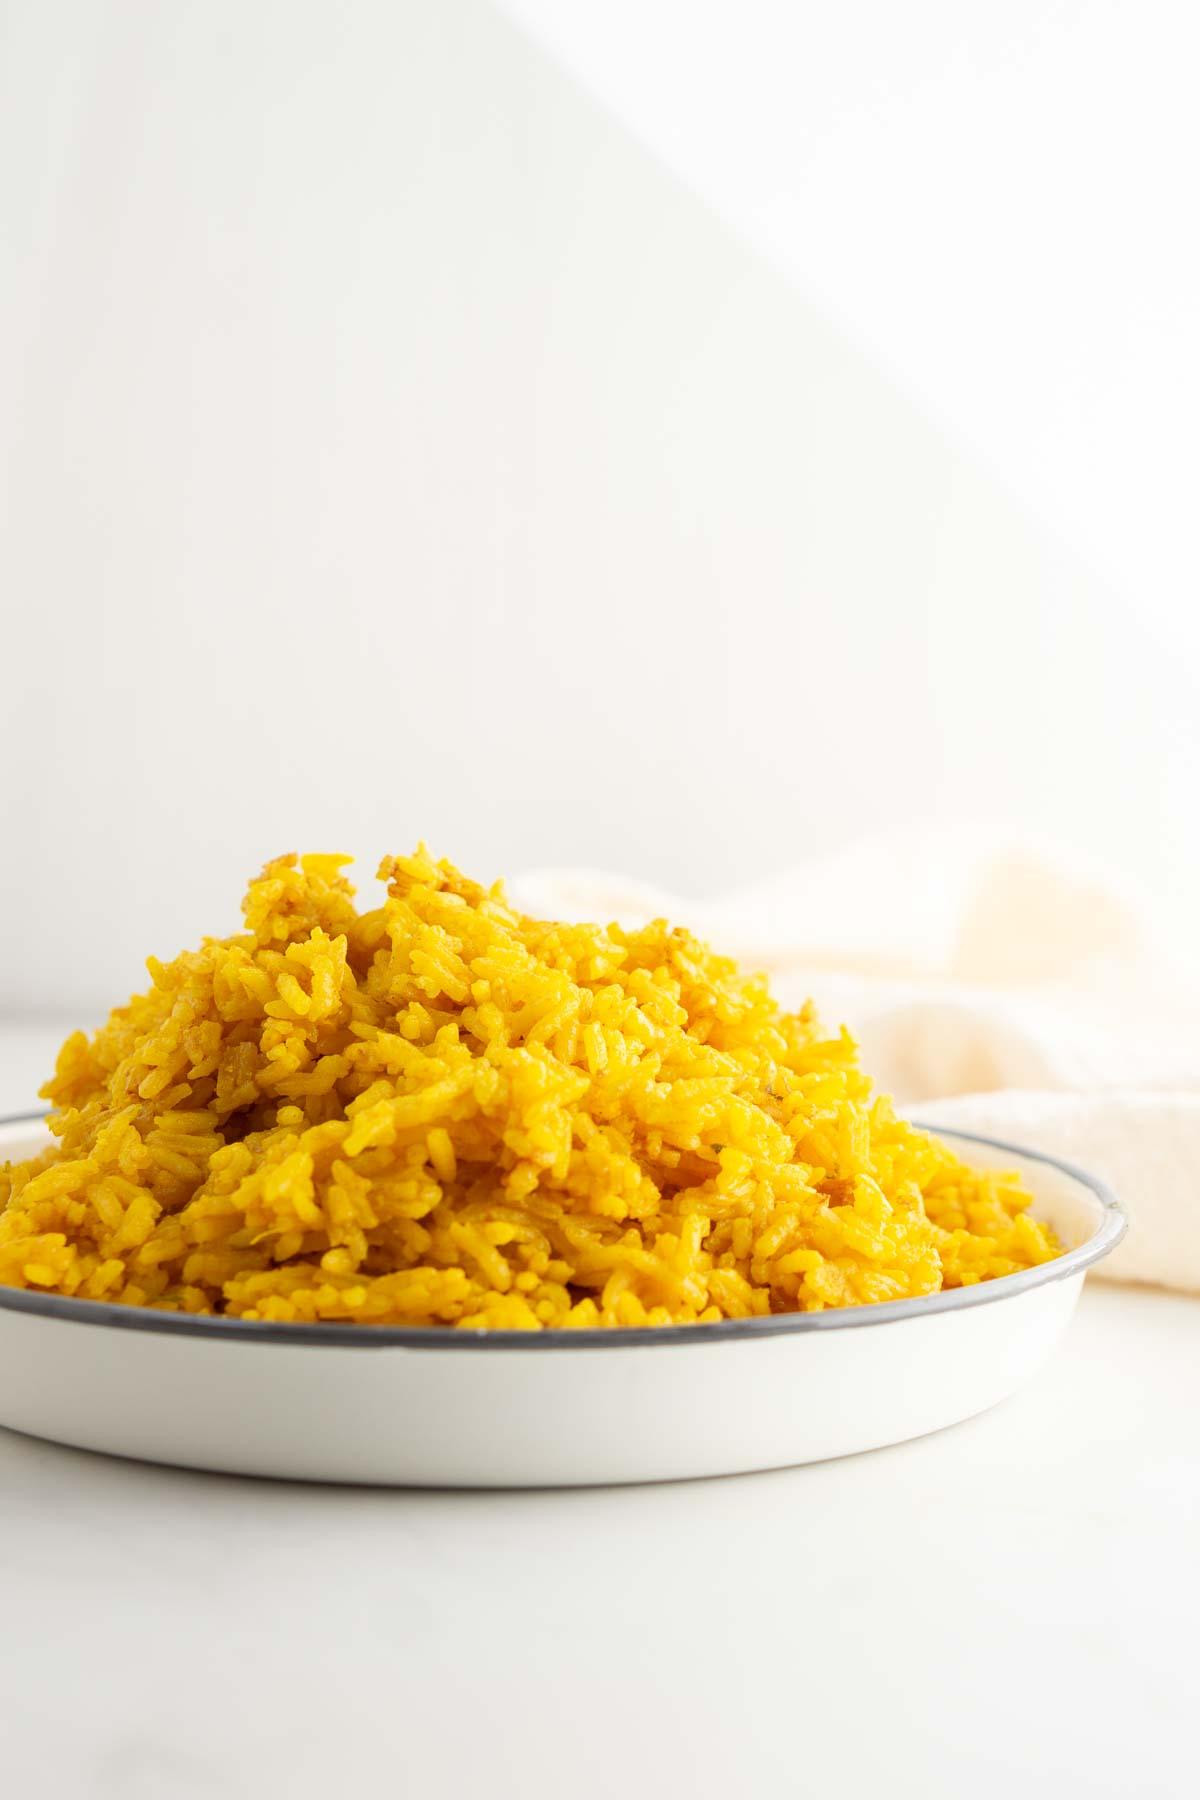 Turmeric rice in a pile on a plate ready to be served